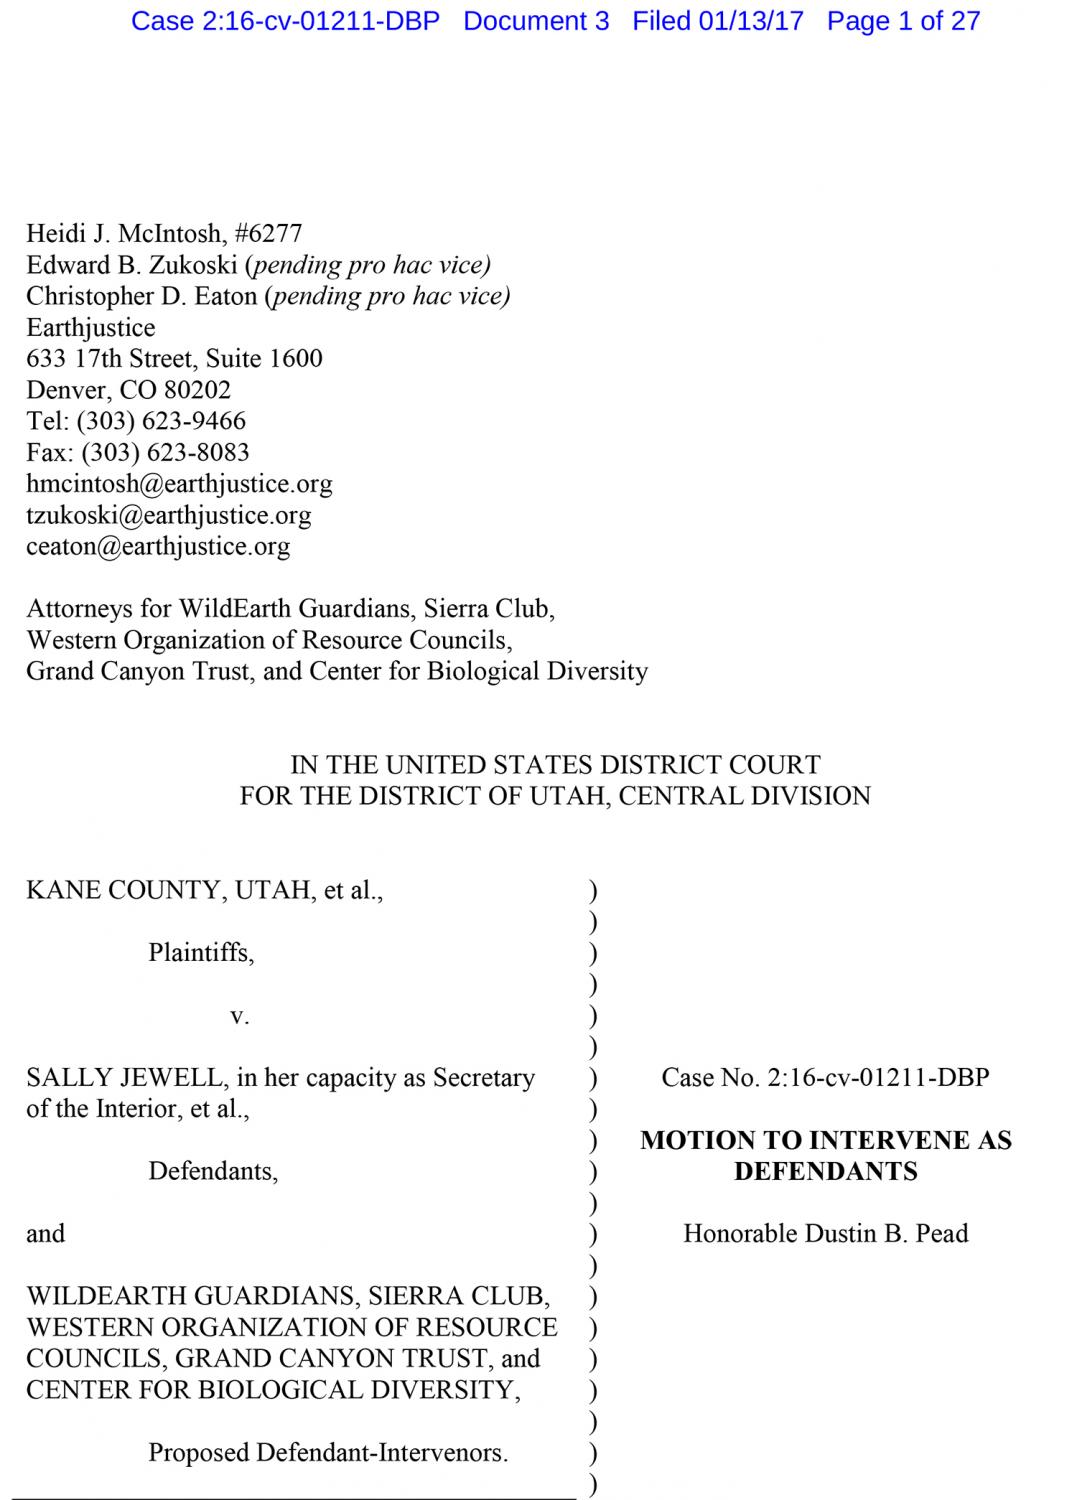 Kane County Coal Leasing Intervention Motion